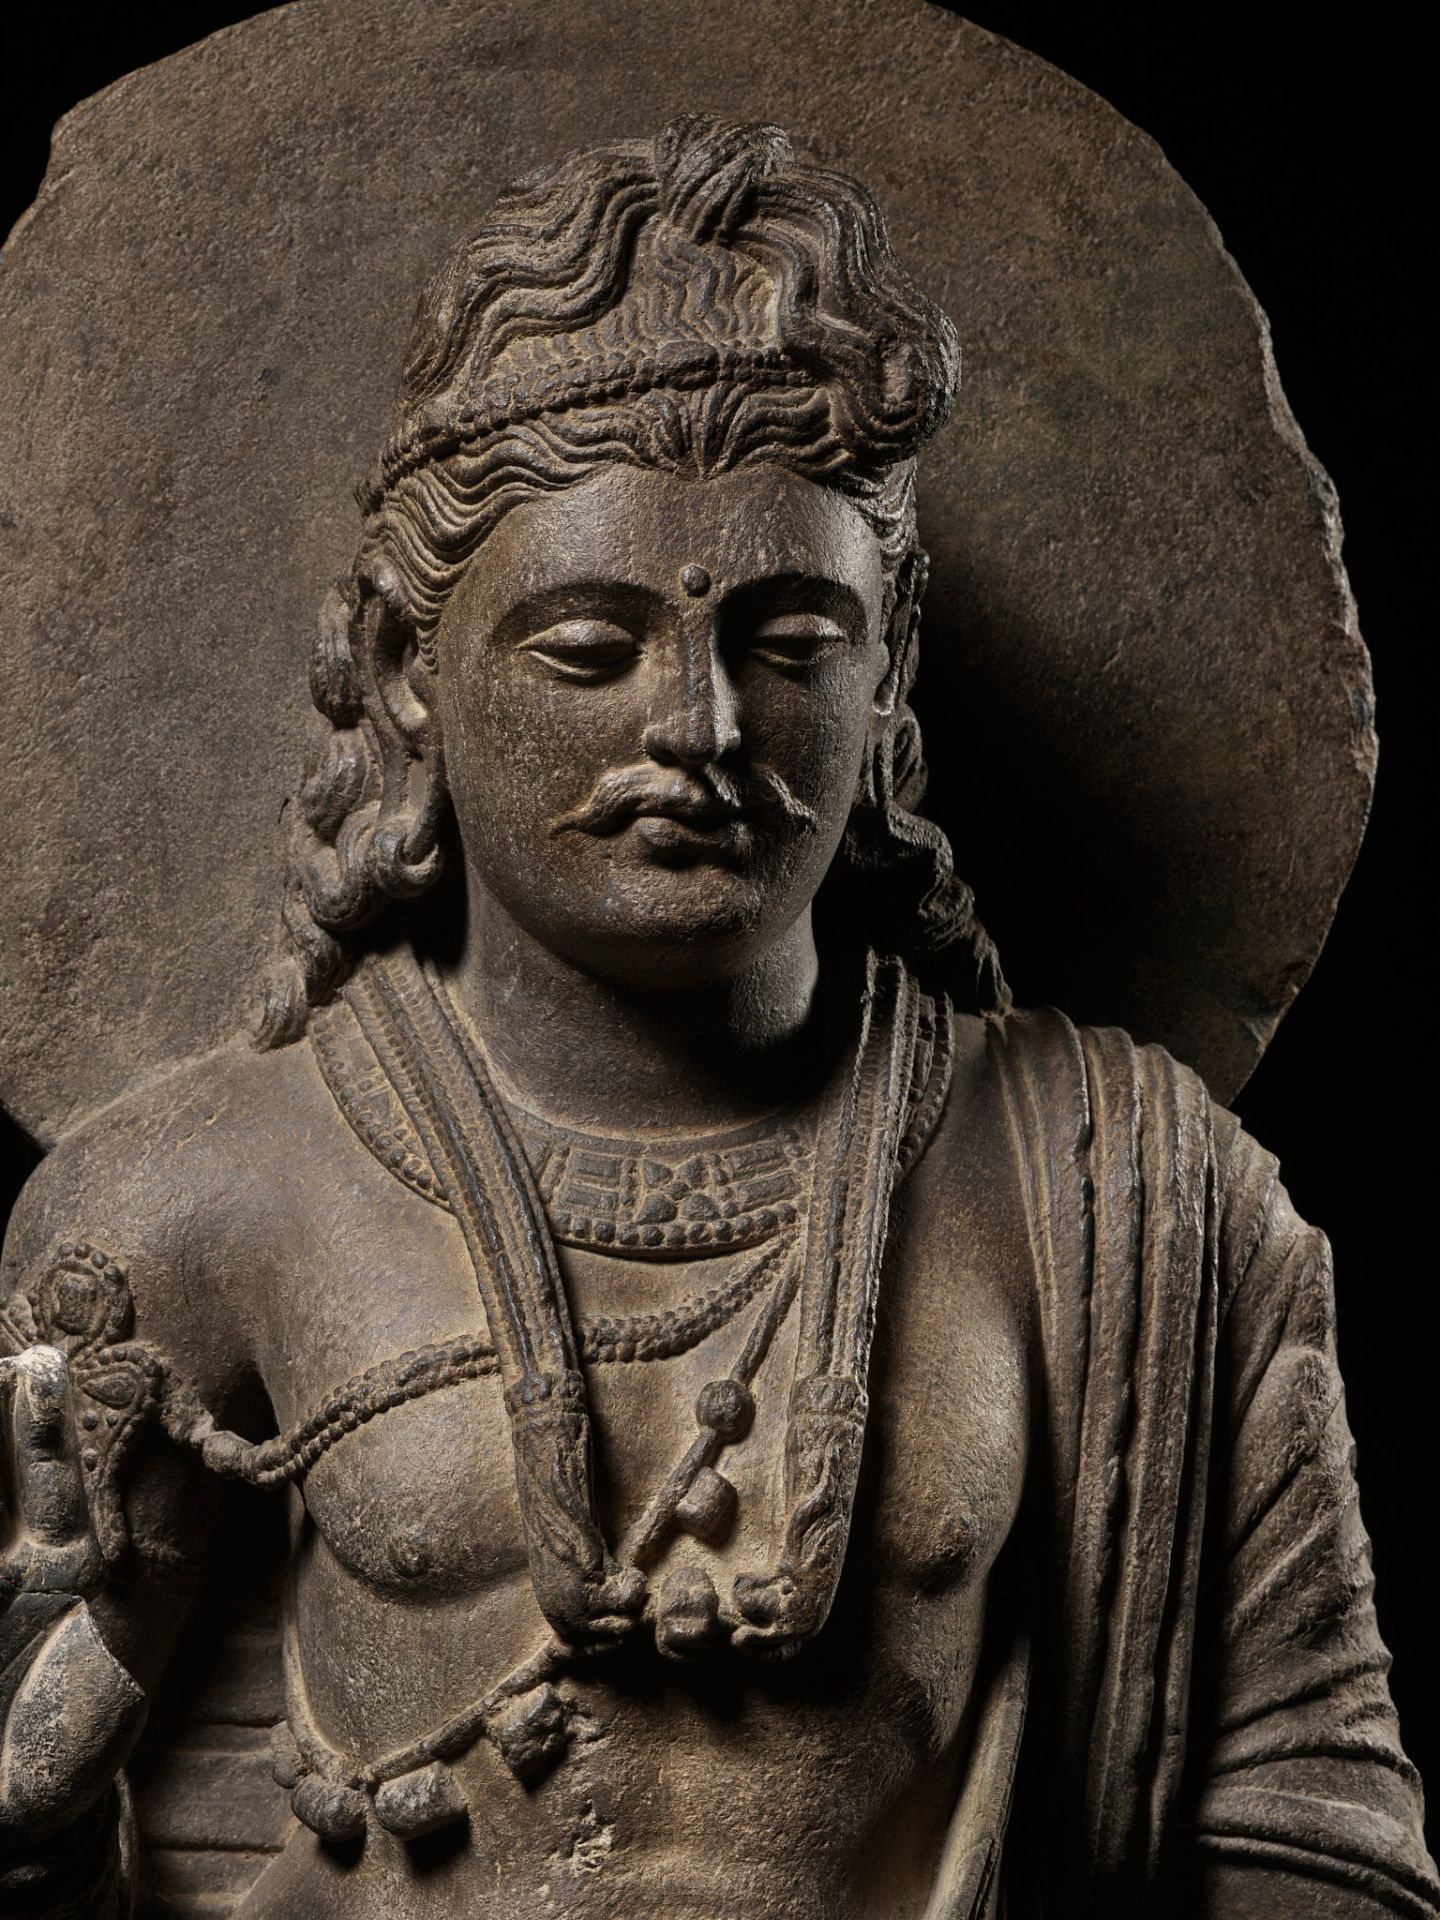 A LARGE AND IMPORTANT GRAY SCHIST FIGURE OF MAITREYA, ANCIENT REGION OF GANDHARA